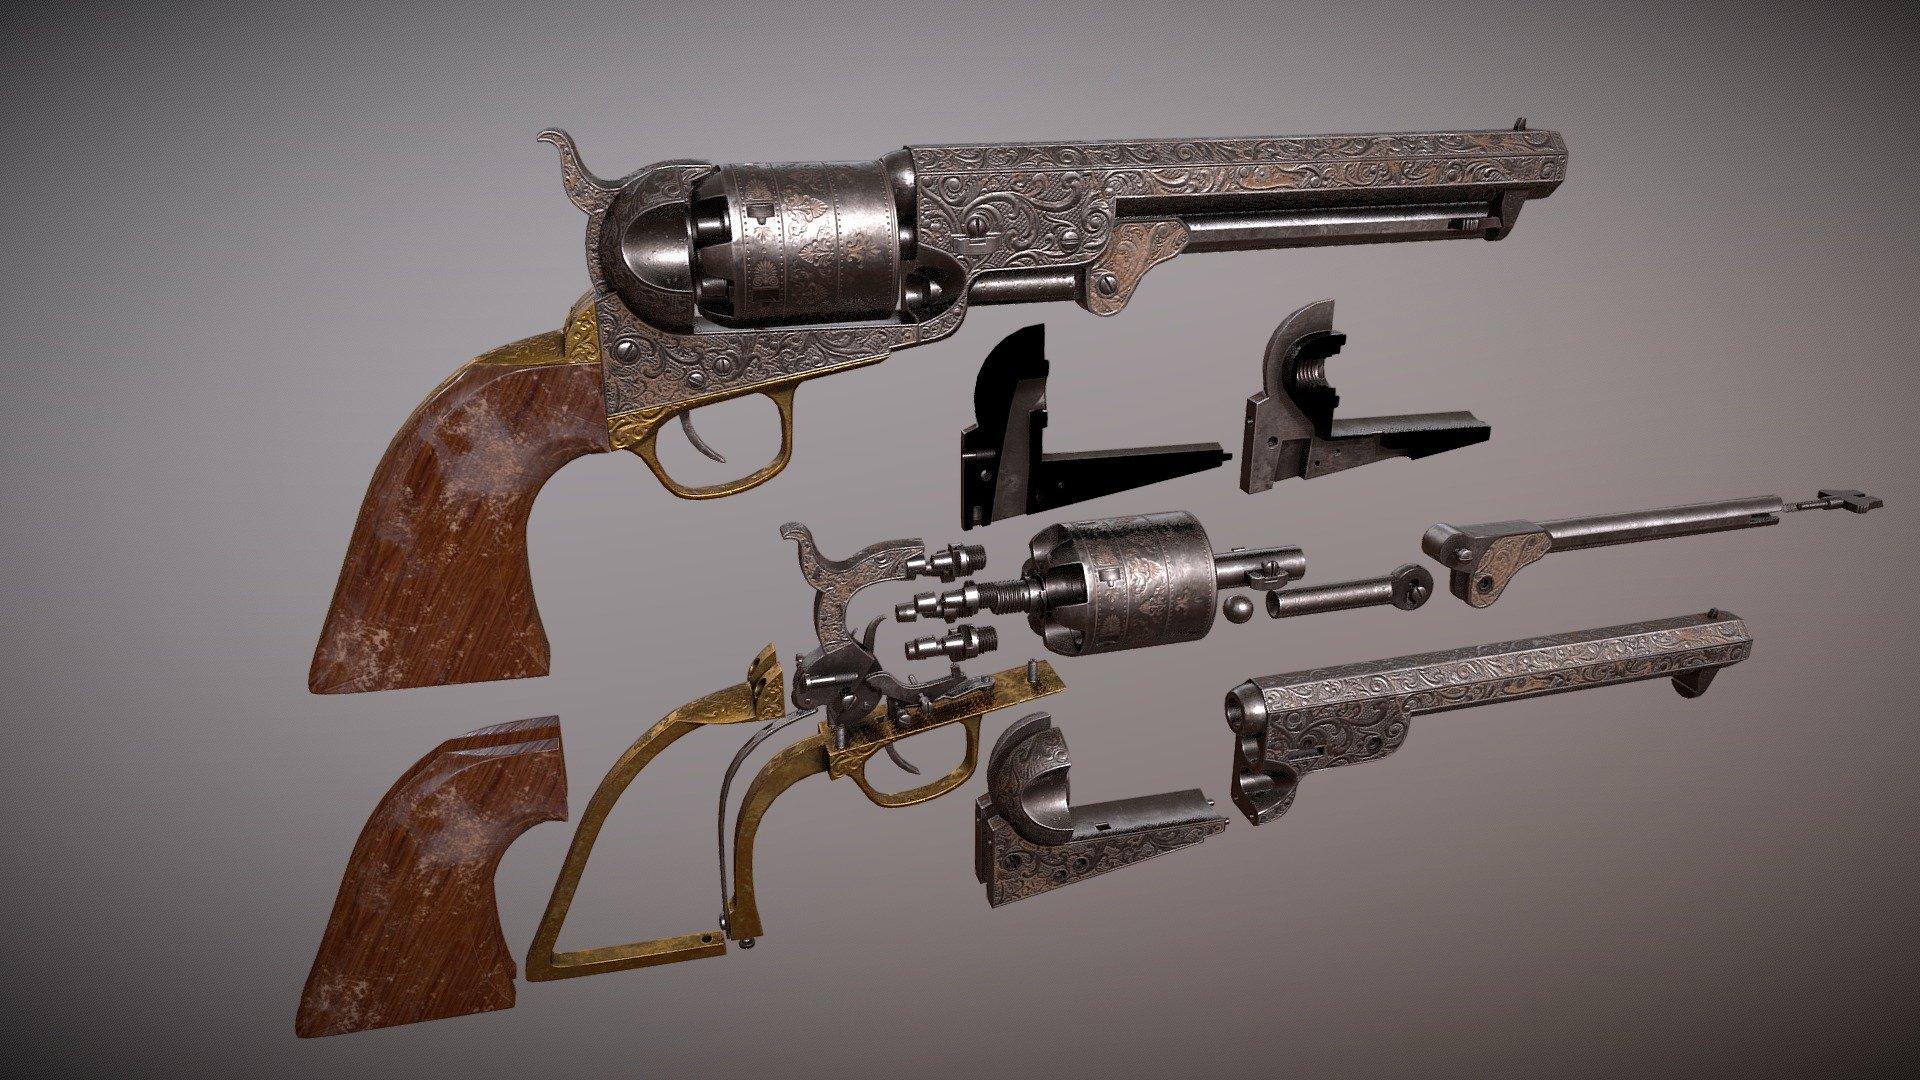 Modelled in Blender and Textures made with the Substance Suite. You are welcome to download and use this as you please! 

More Renders here! https://www.artstation.com/artwork/GXaWlz

This is my take on the 1851 Navy Colt Revolver, I started this a while back but recently felt inspired to finish it thanks to the game Red Dead Redemption 2. I challenged myself to model all the intricate parts of this revolver as I became really engrossed in the functionality of it 3d model